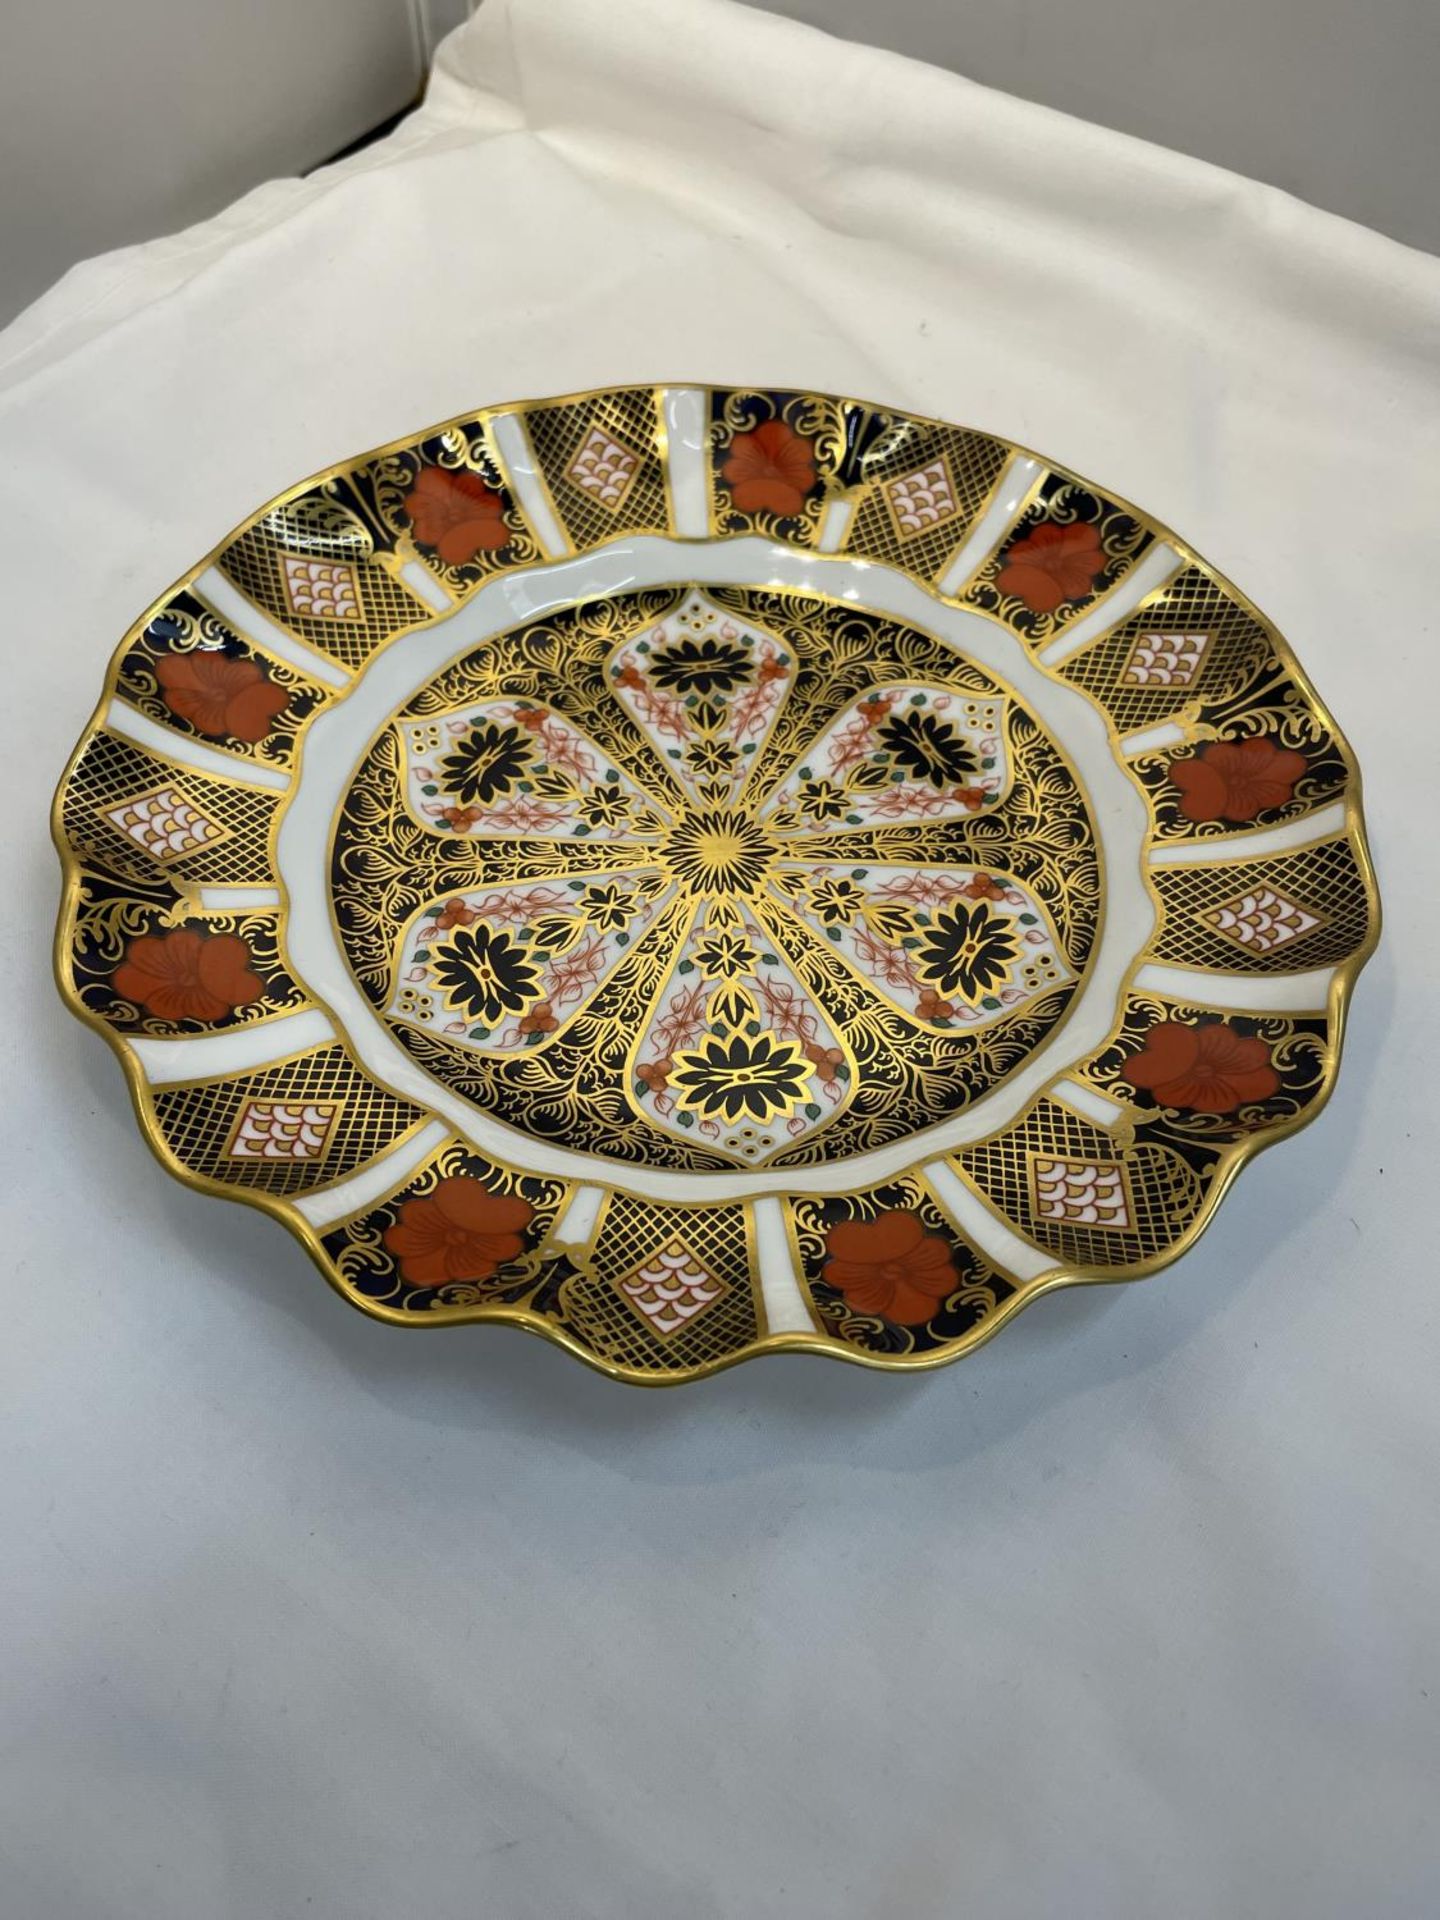 A ROYAL CROWN DERBY IMARI PLATE WITH FLUTED EDGE 1128 XLB 22CM DIAMETER